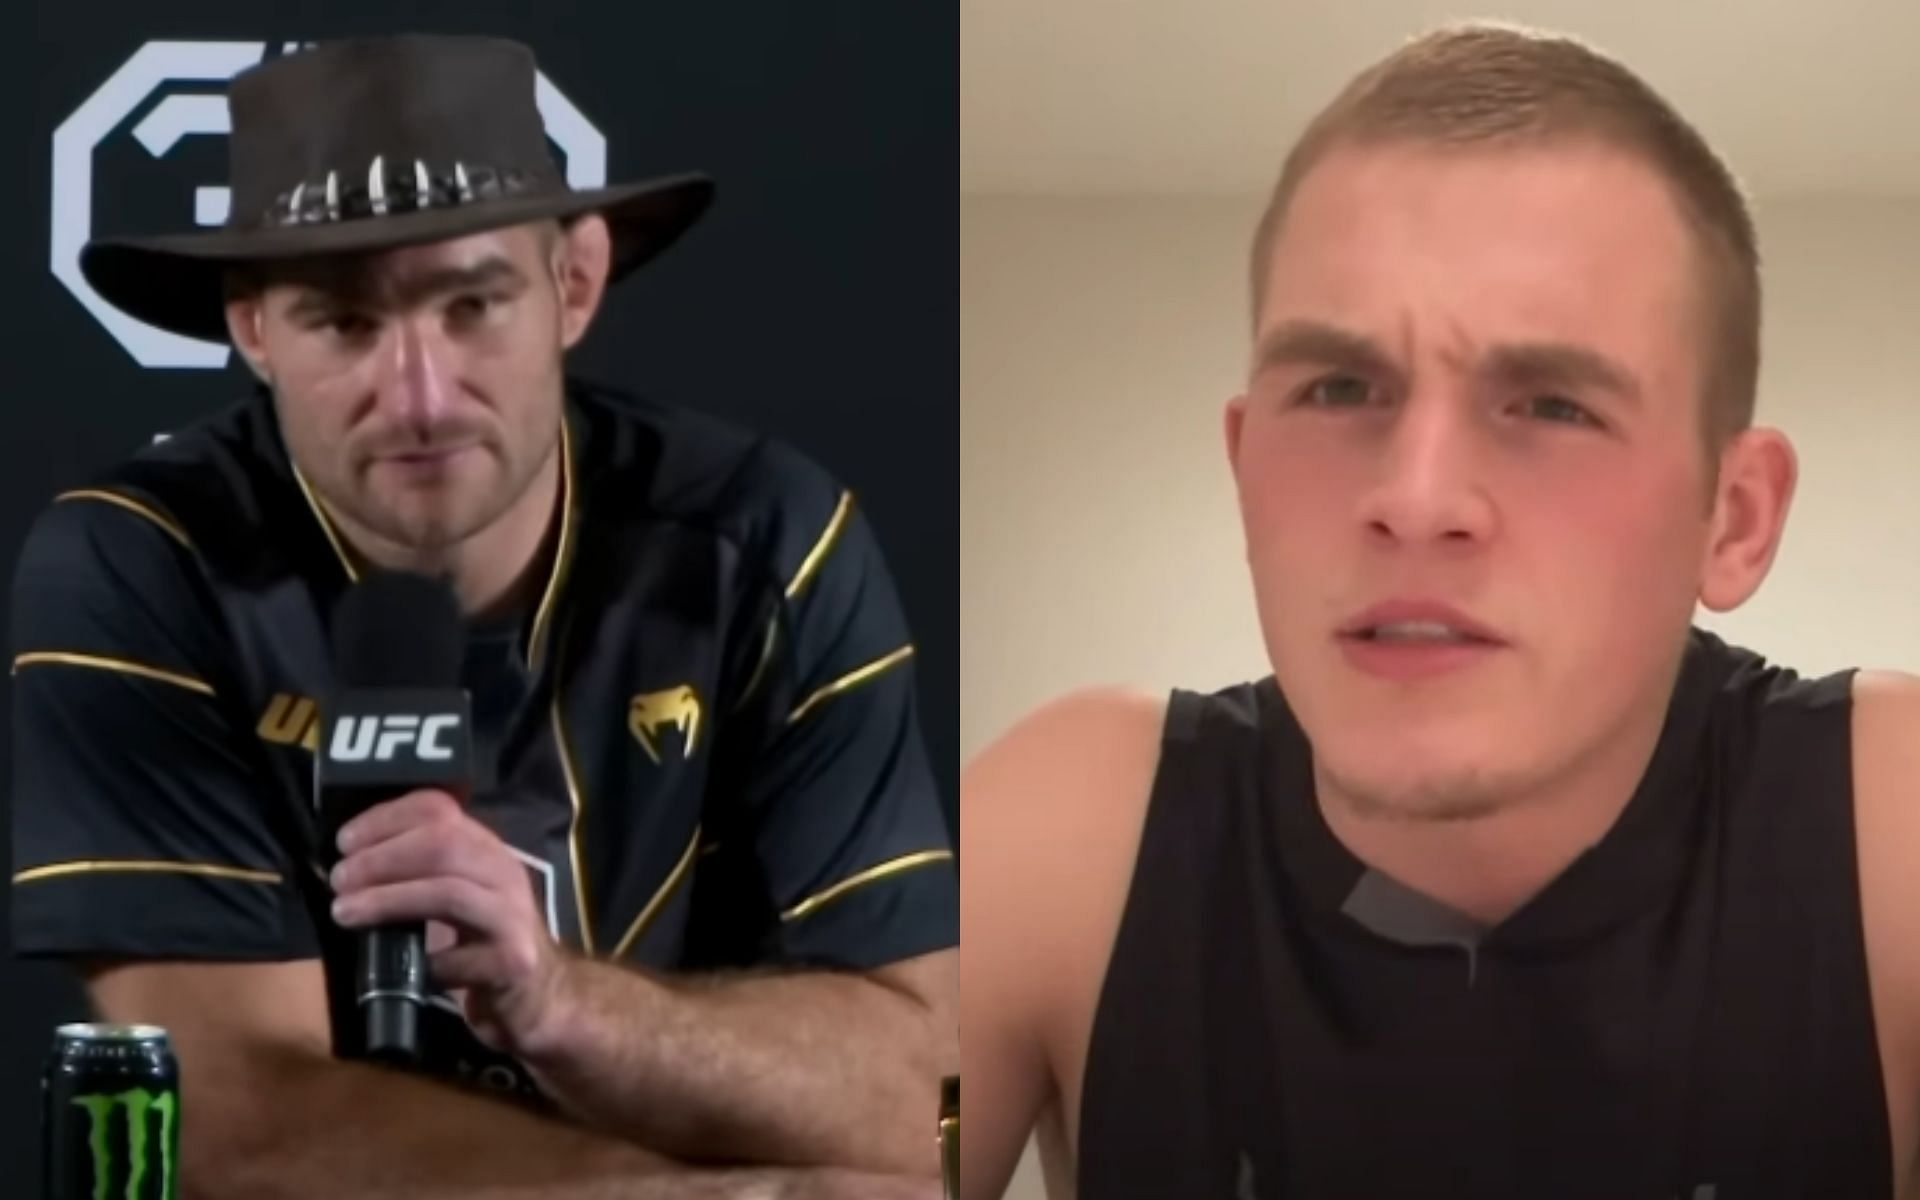 Ian Garry [Right] said he wants to move up to 185-pounds and fight Sean Strickland [Right] [Image courtesy: UFC and MMAFightingonSBN - YouTube]